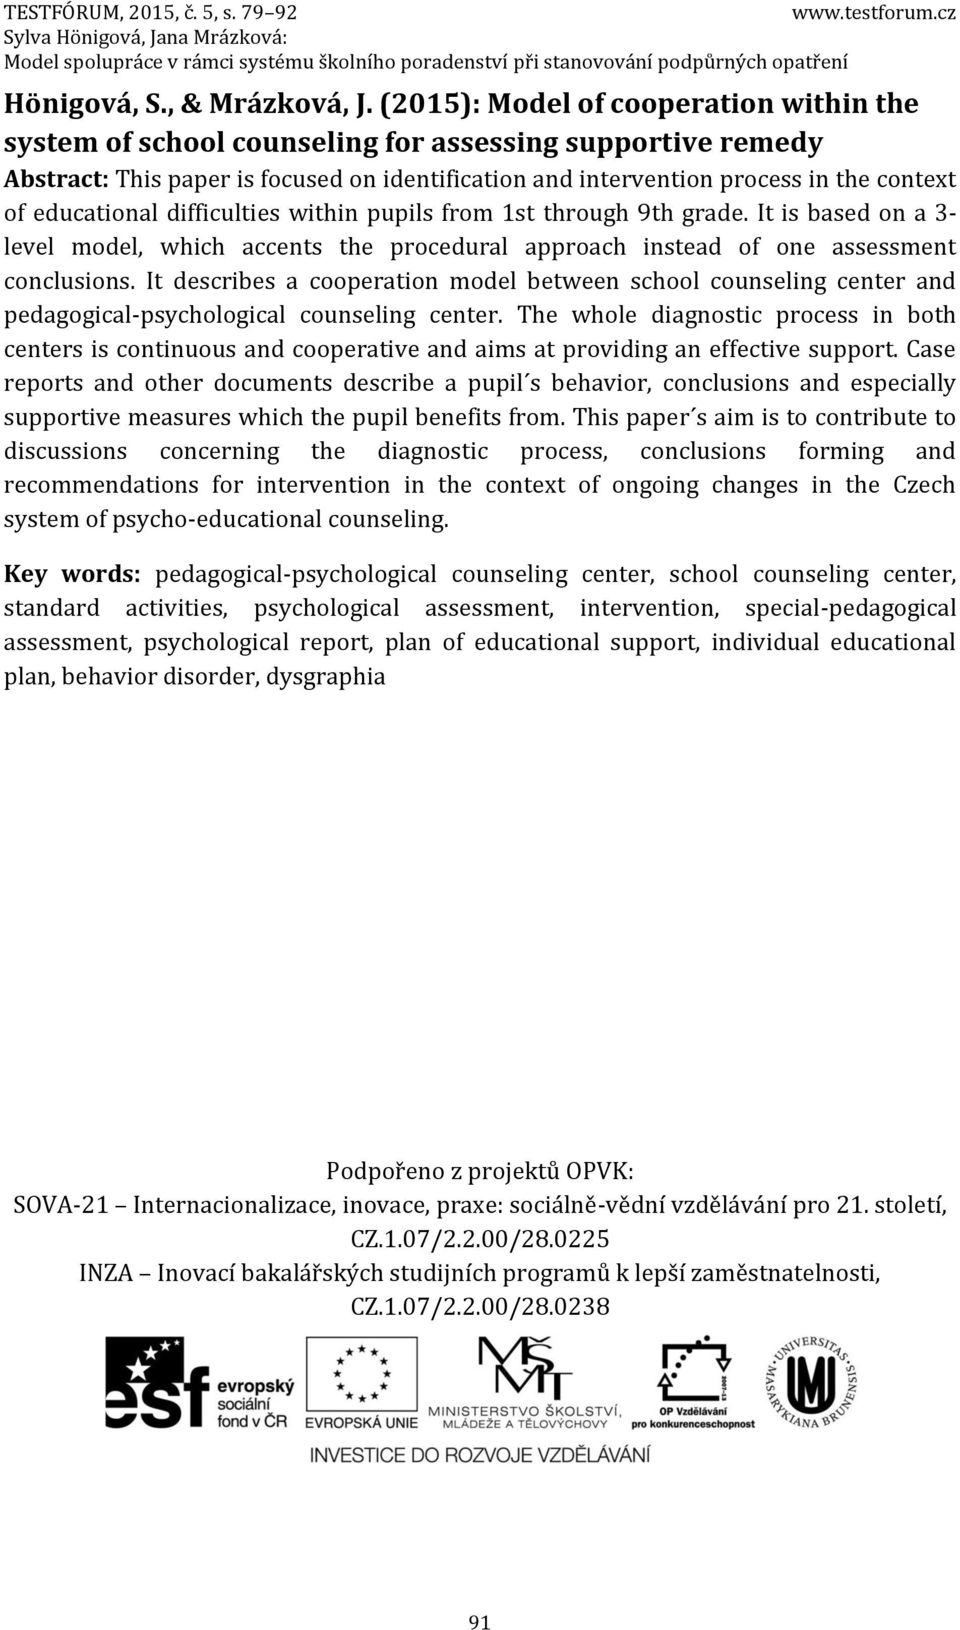 educational difficulties within pupils from 1st through 9th grade. It is based on a 3- level model, which accents the procedural approach instead of one assessment conclusions.